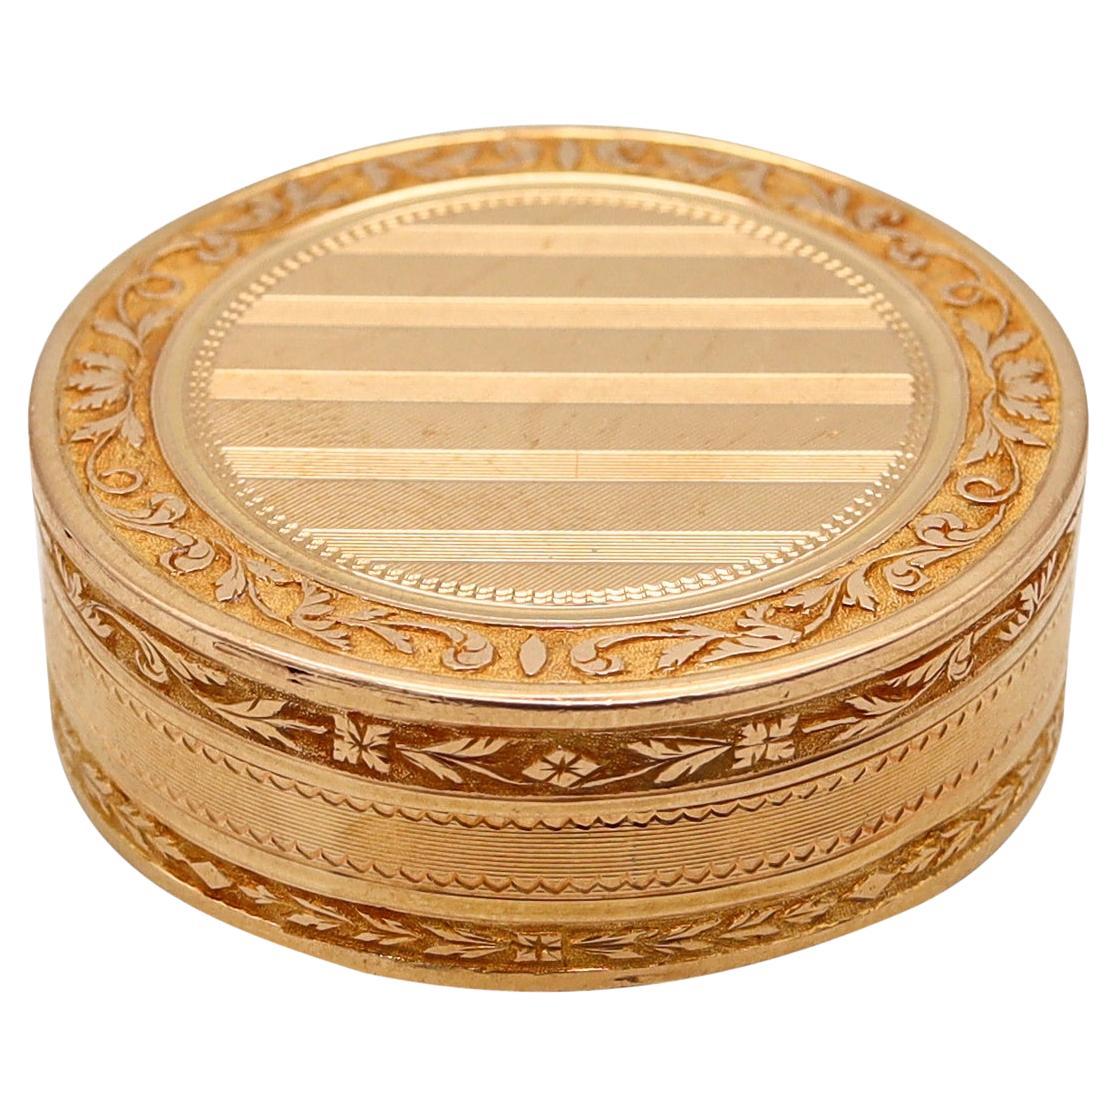 French 1798-1809 Neoclassical Louis XVI Round Snuff Box In Labrated 18Kt Yellow